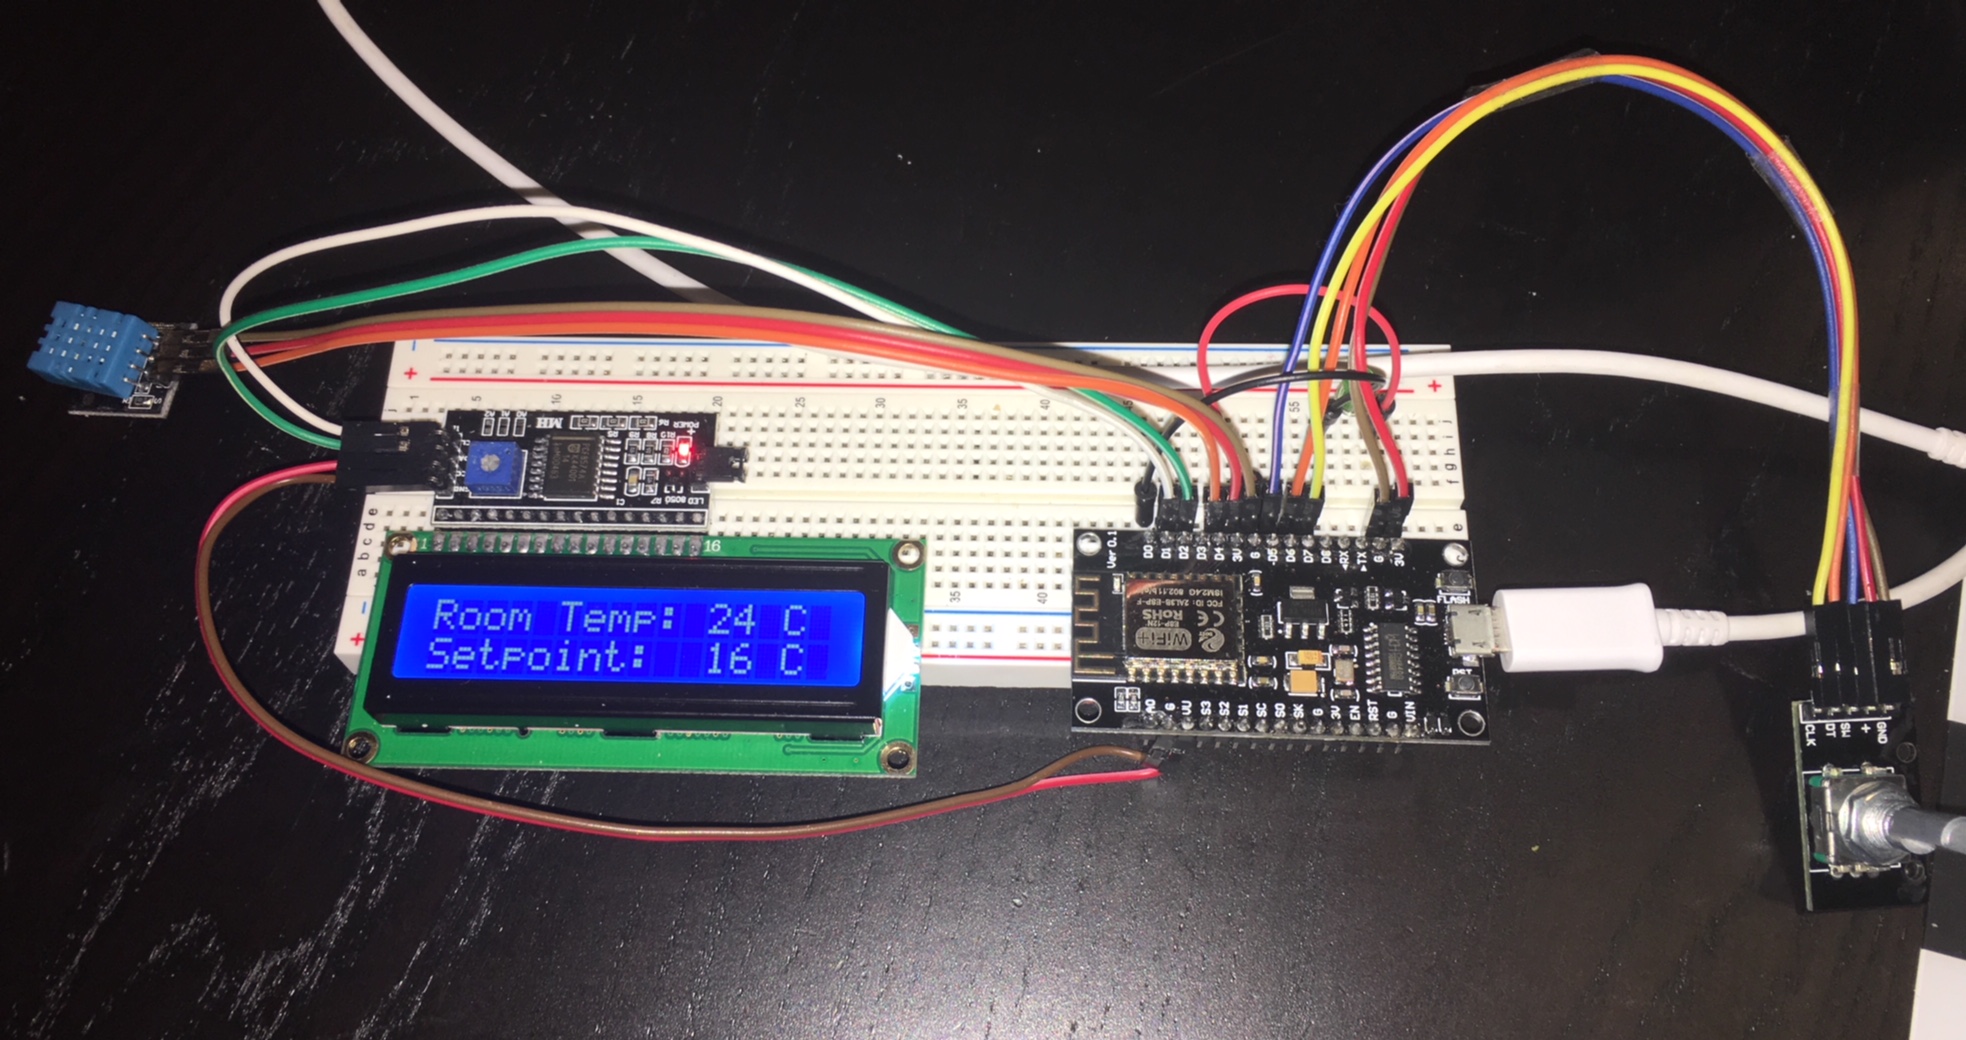 Inmuebles Deflector girasol Alexa-Controlled Thermostat with NodeMCU v3 and Raspberry Pi - Hackster.io